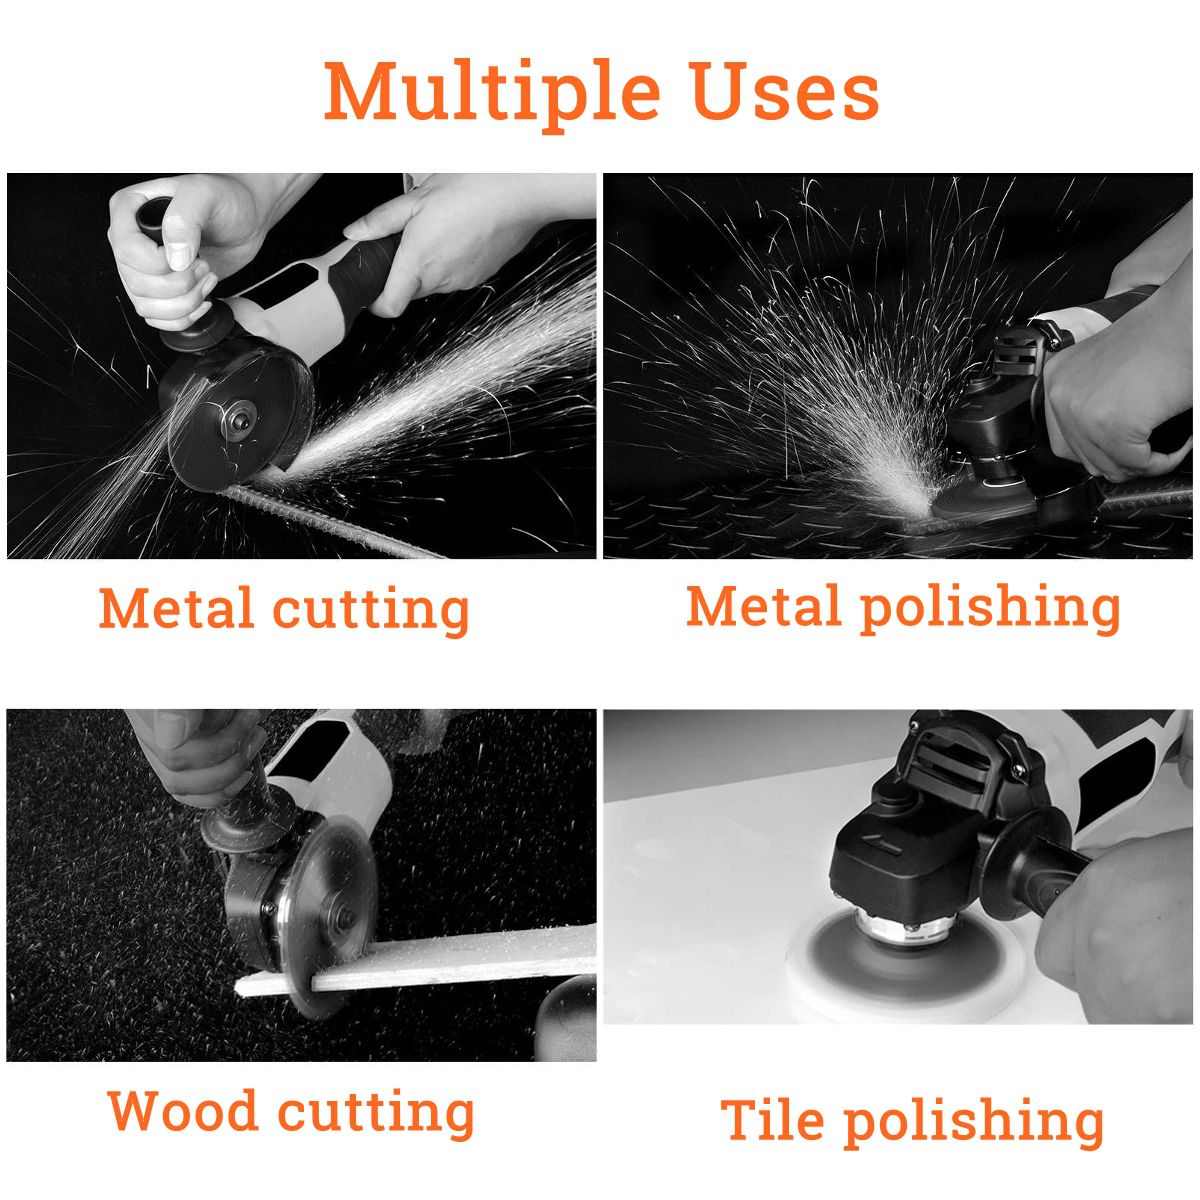 21800mah29800mah-Electric-Angle-Grinder-Lithium-Ion-Battery-Cut-Off-ToolGrinder-Cordless-Polisher-Po-1424117